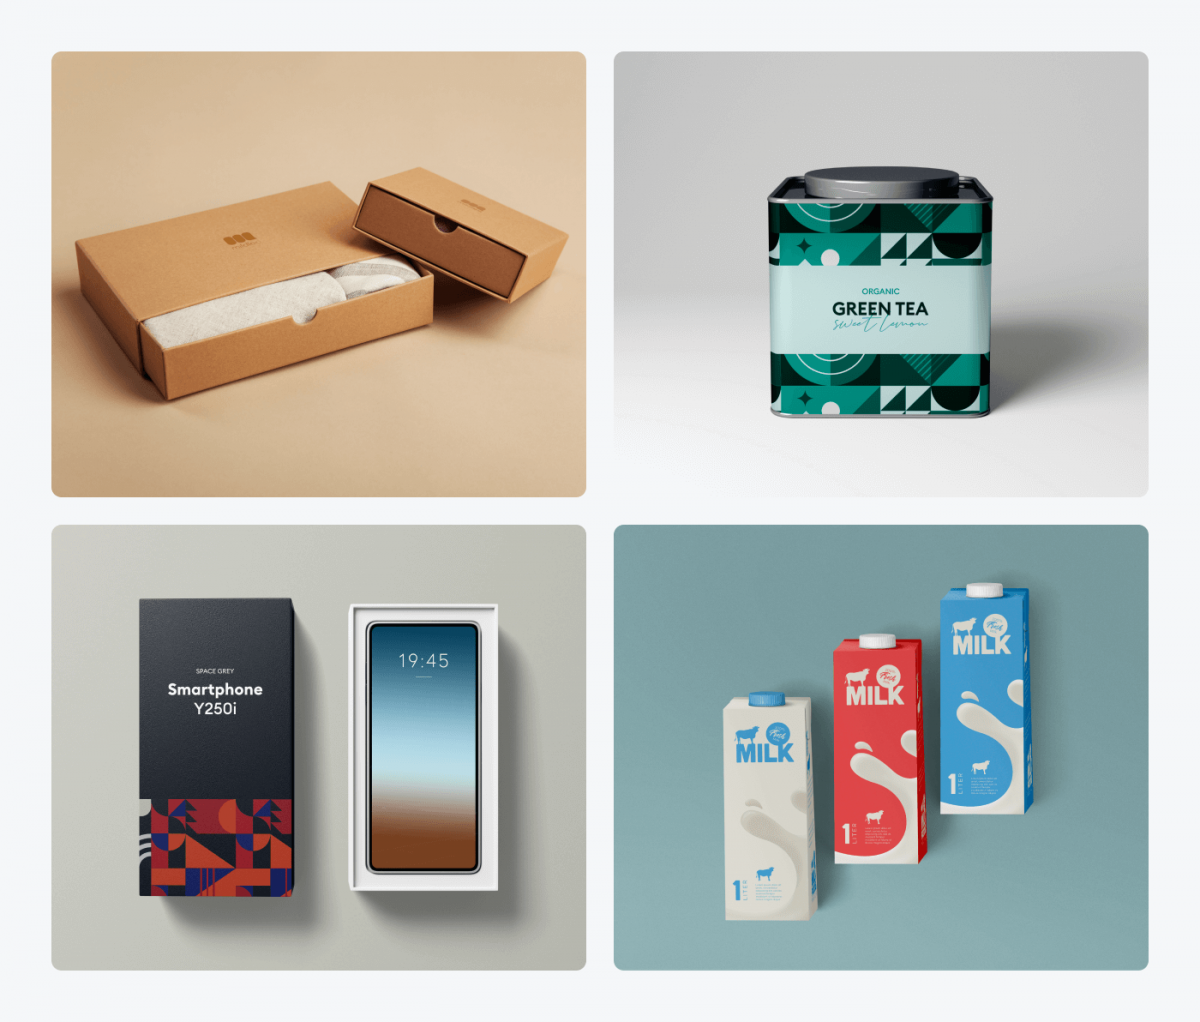 Packaging design examples